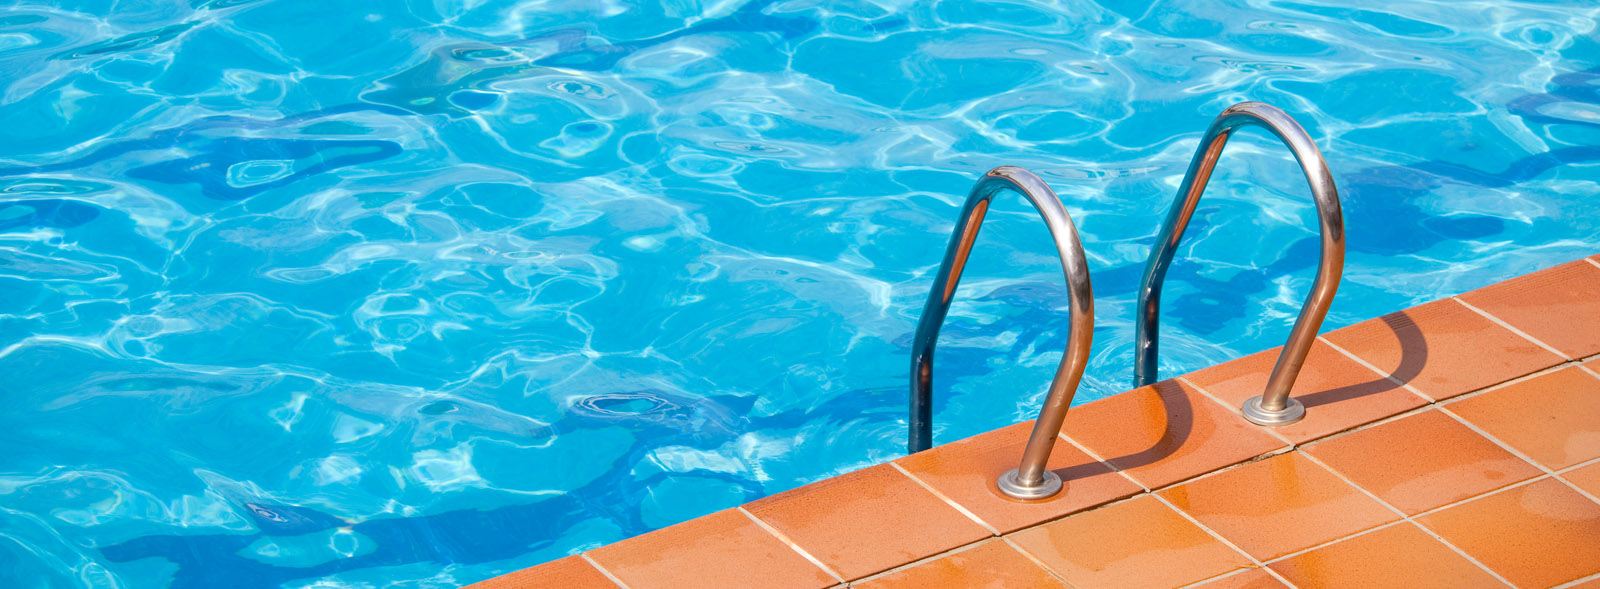 automatic suction swimming pool cleaners suppliers southern suburbs and atlantic seaboard cape town